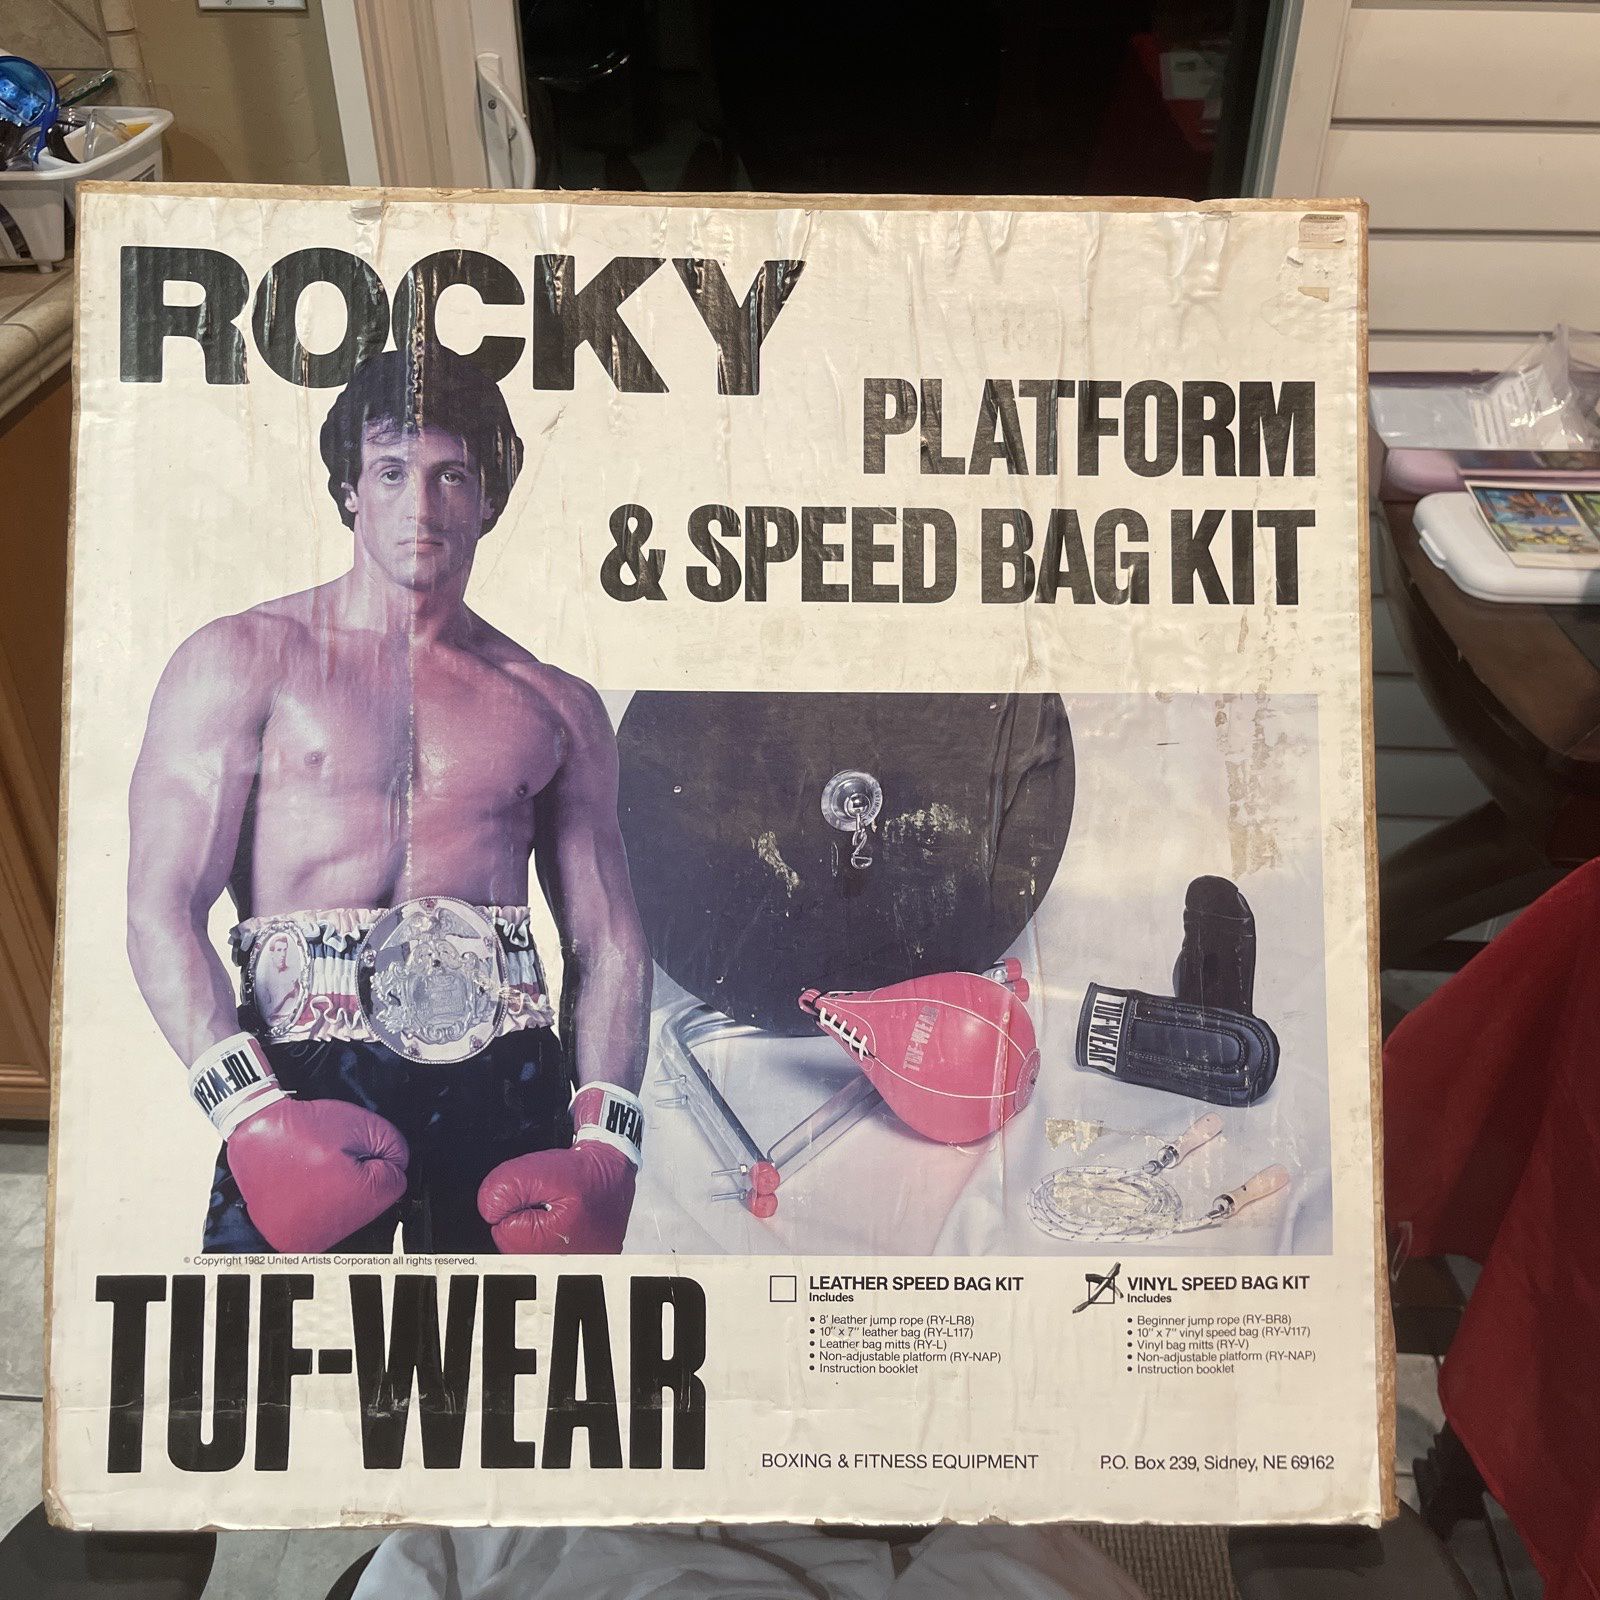 Own A Piece Of The 80’s Rocky Platform And Speed Bag Kit